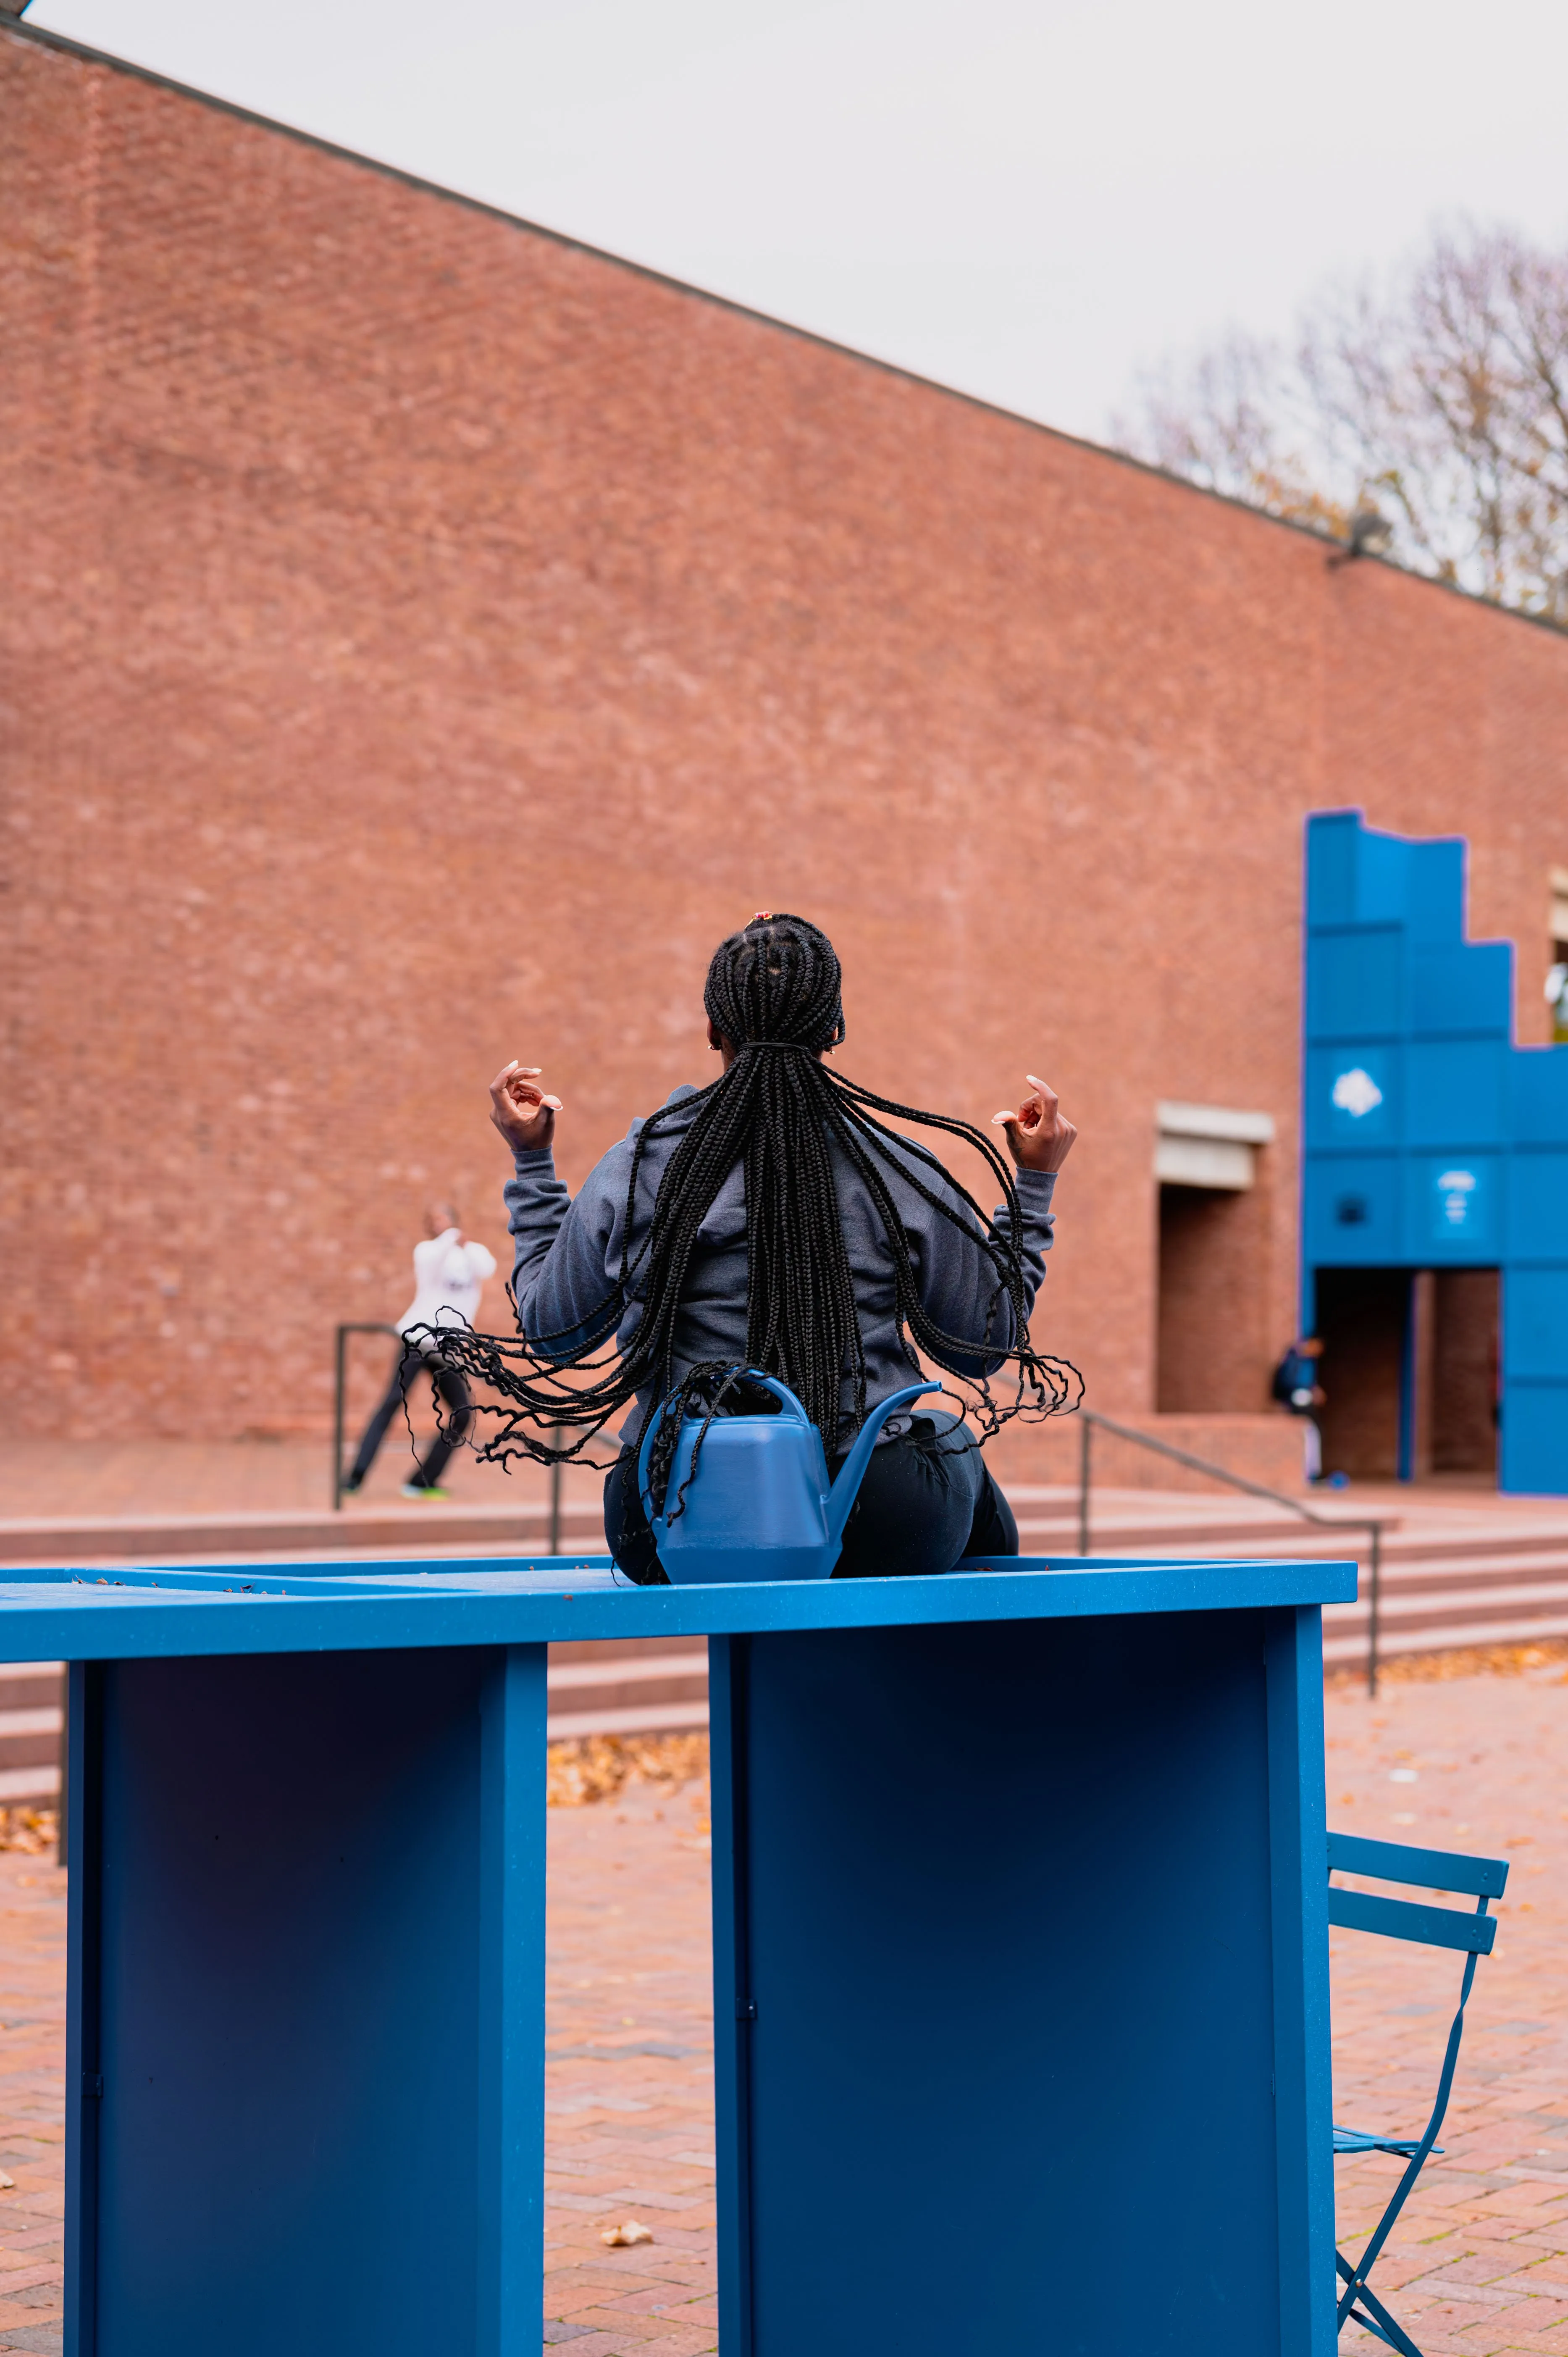 Person sitting on a blue ledge in an outdoor urban setting with another individual in the background.